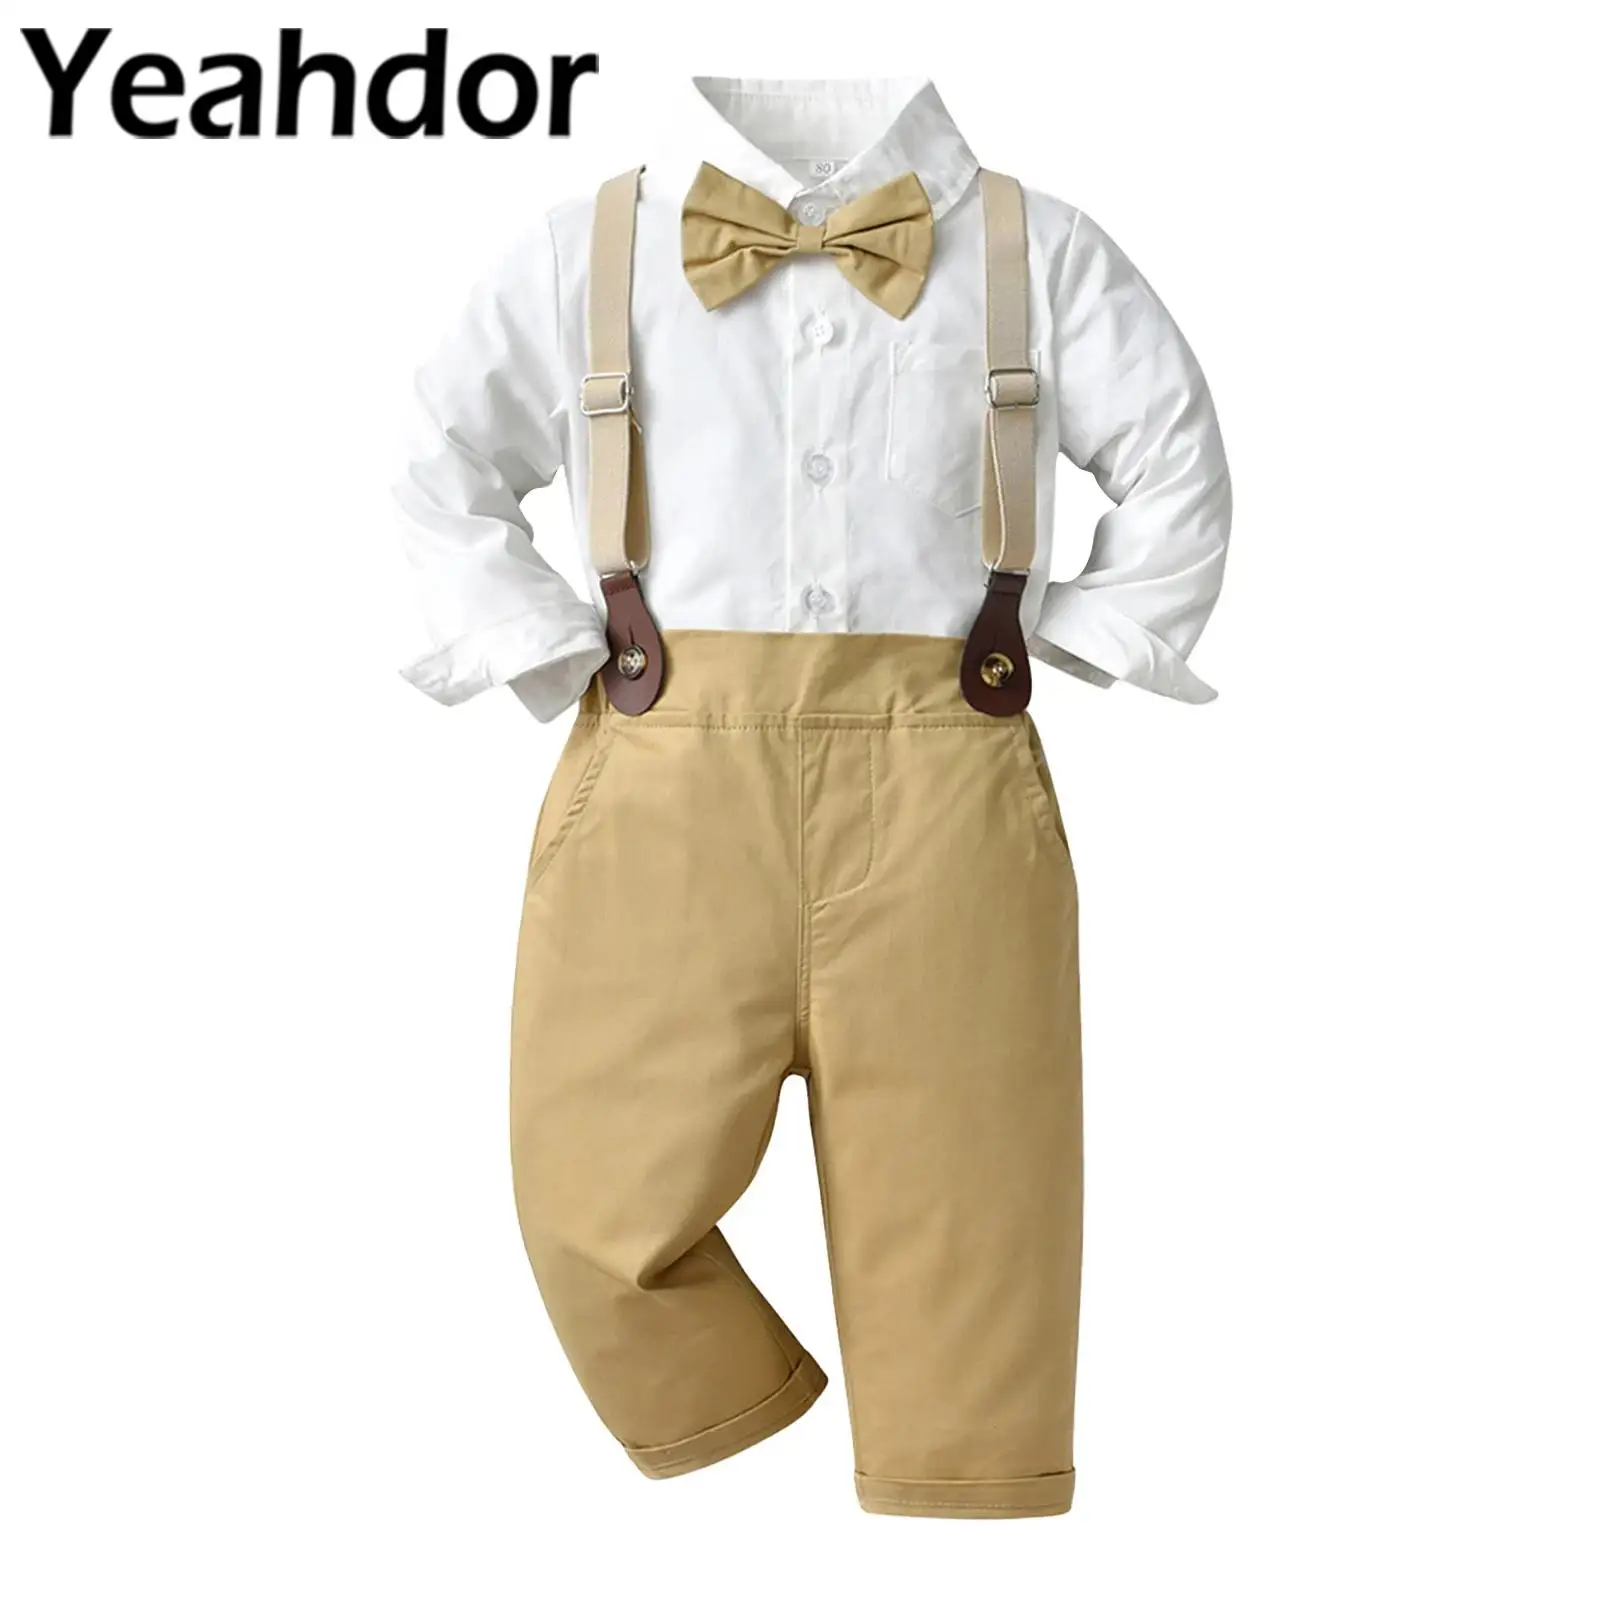 

Boy's Gentleman Suit Birthday Party Outfits Kids Formal Outfit Baby's Christening Clothes Set for Wedding Banquet Baptism Wear